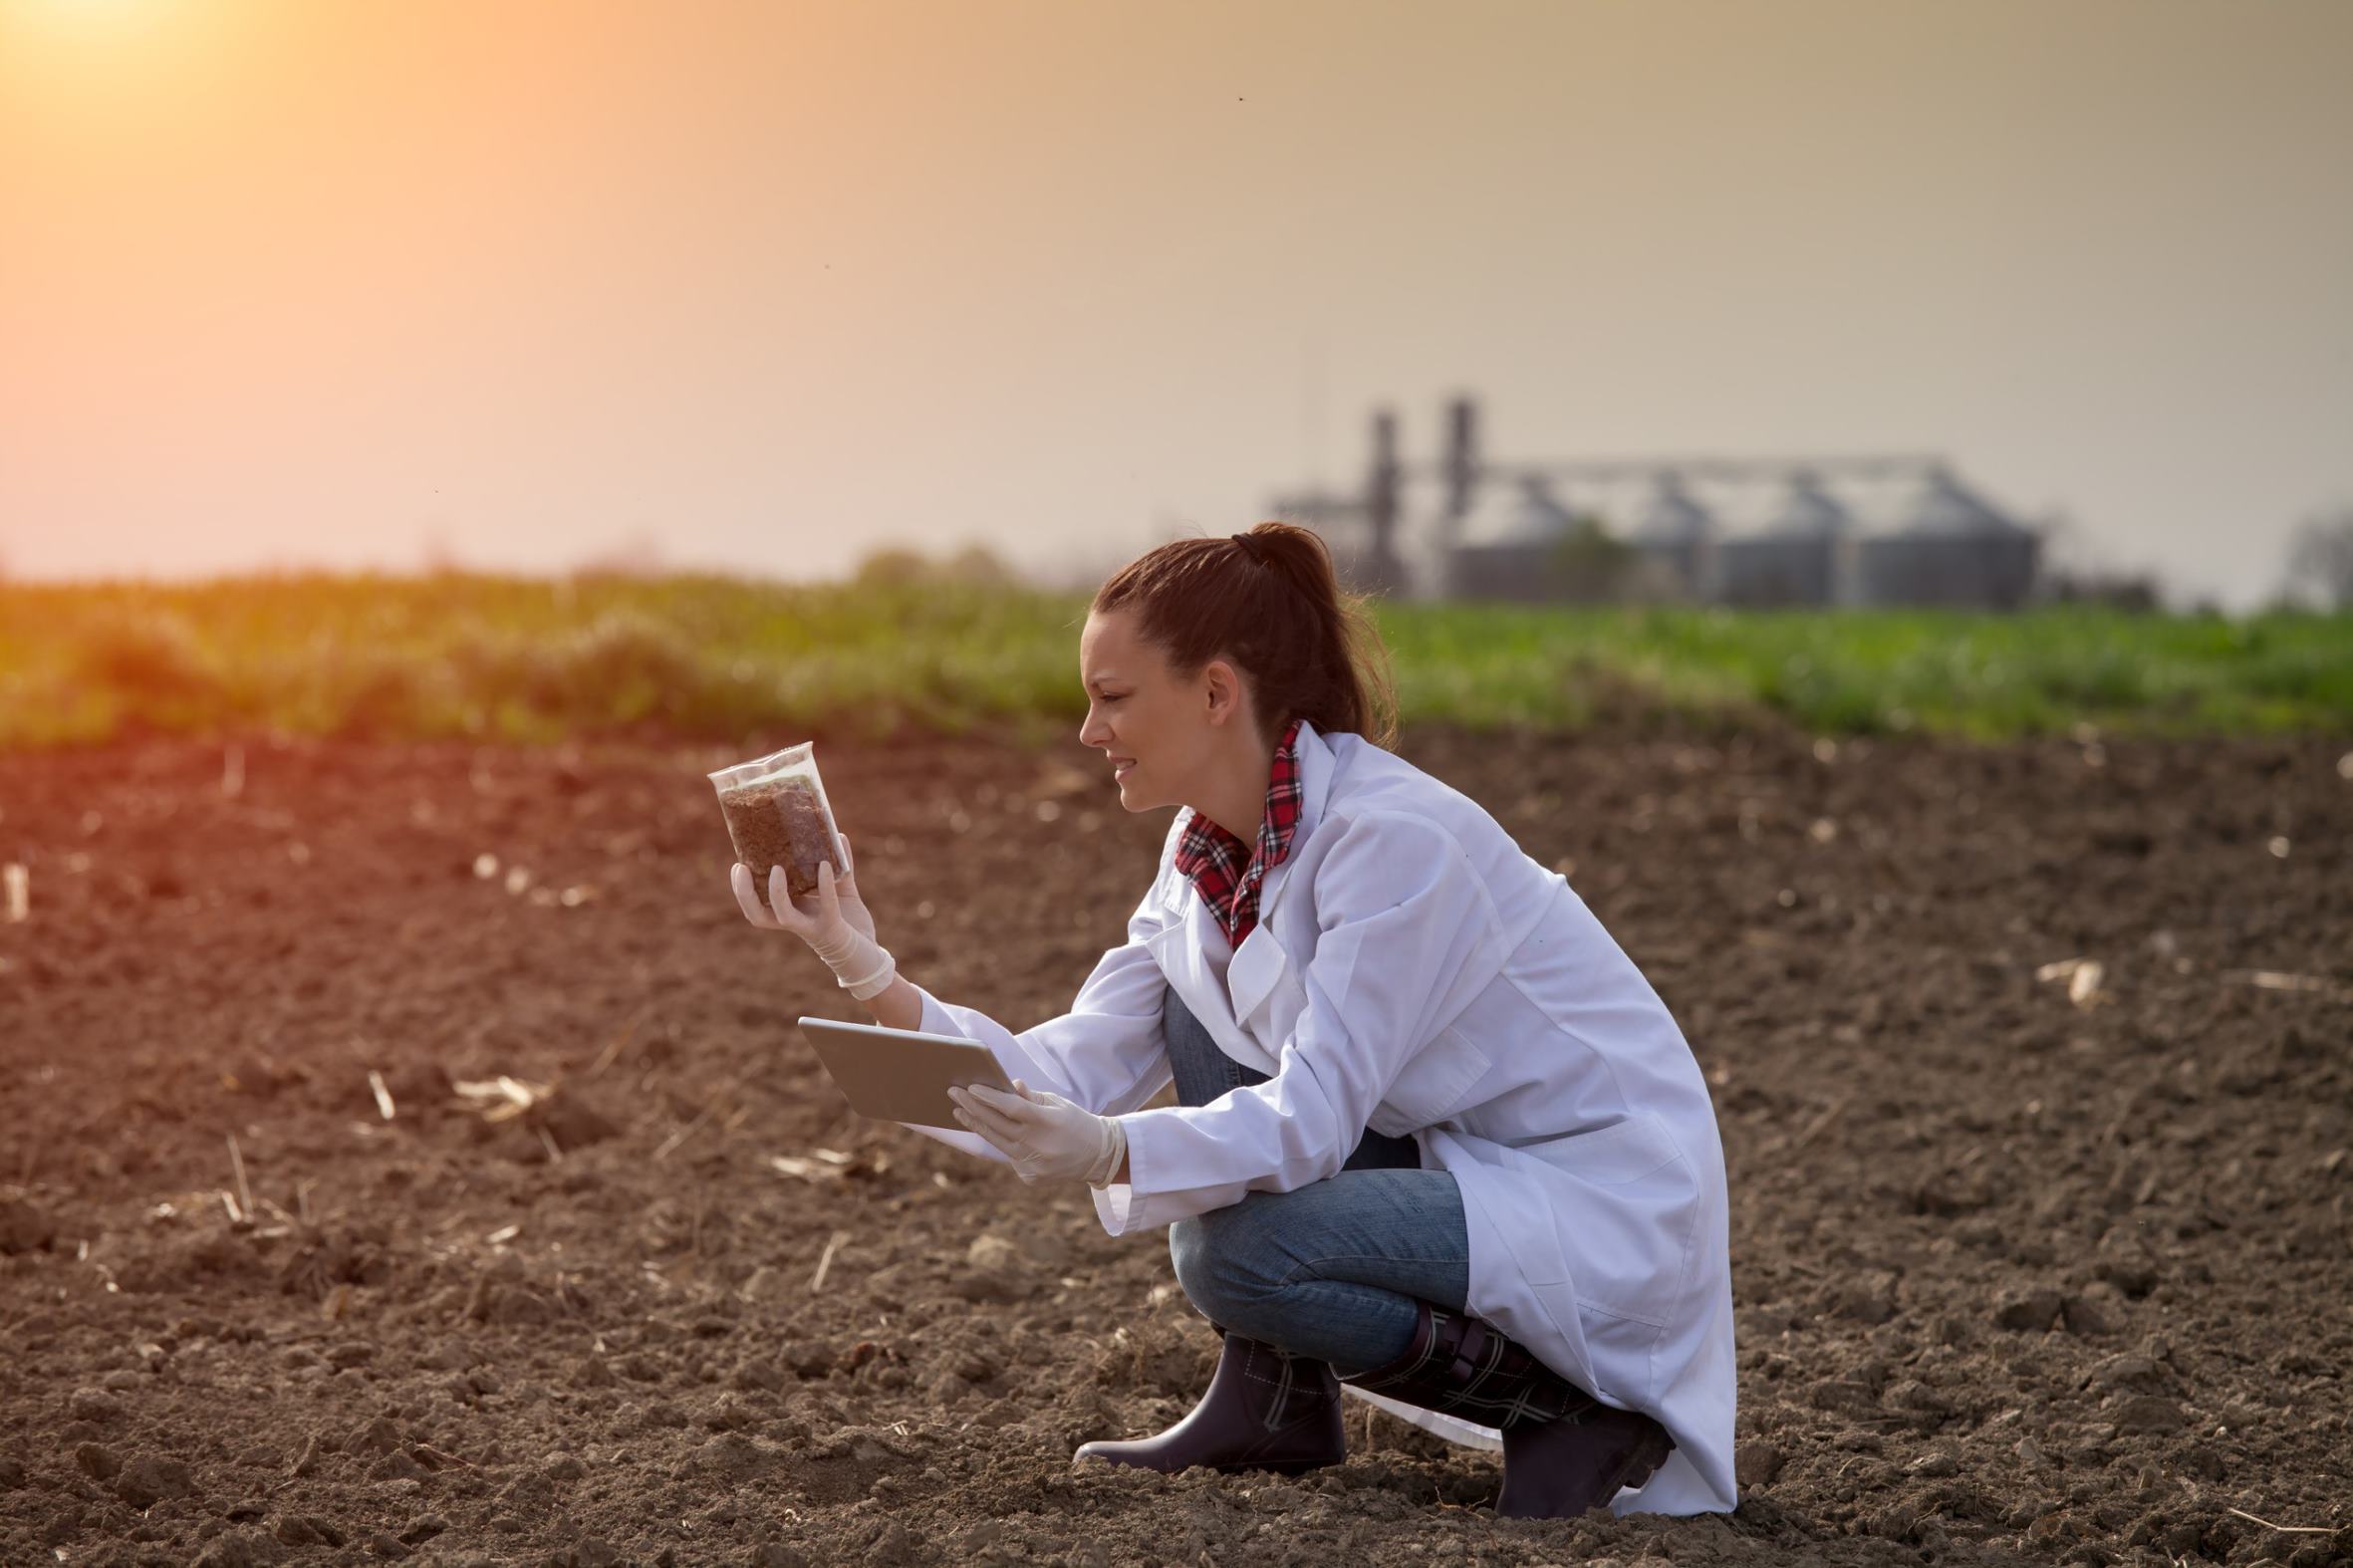 Industry scientist looks at soil sample with ipad